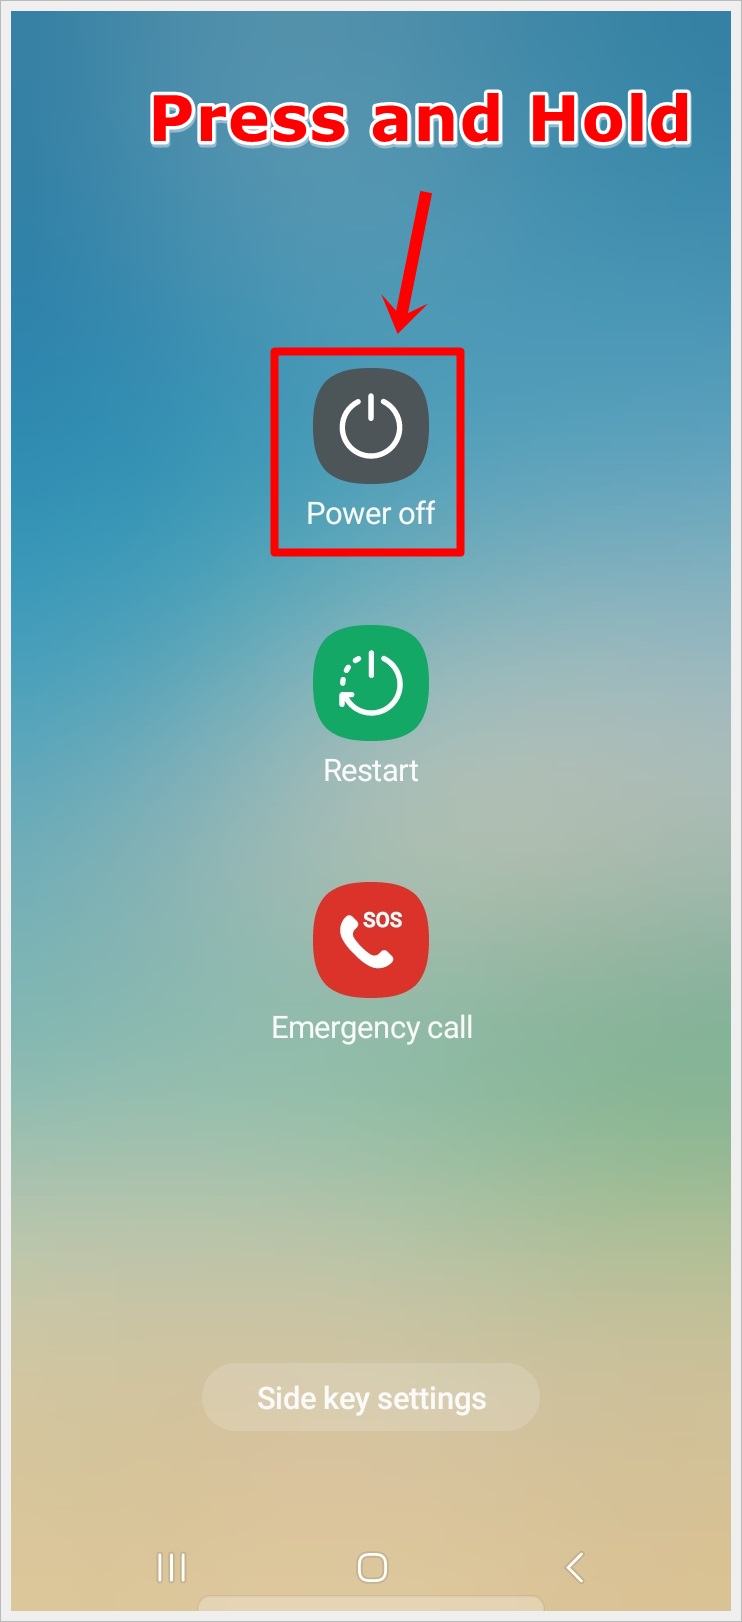 This image displays a screenshot of a Samsung phone, showcasing the 'Power off,' 'Restart,' and 'Emergency call' buttons. The 'Power off' button is highlighted indicating to press and hold it.